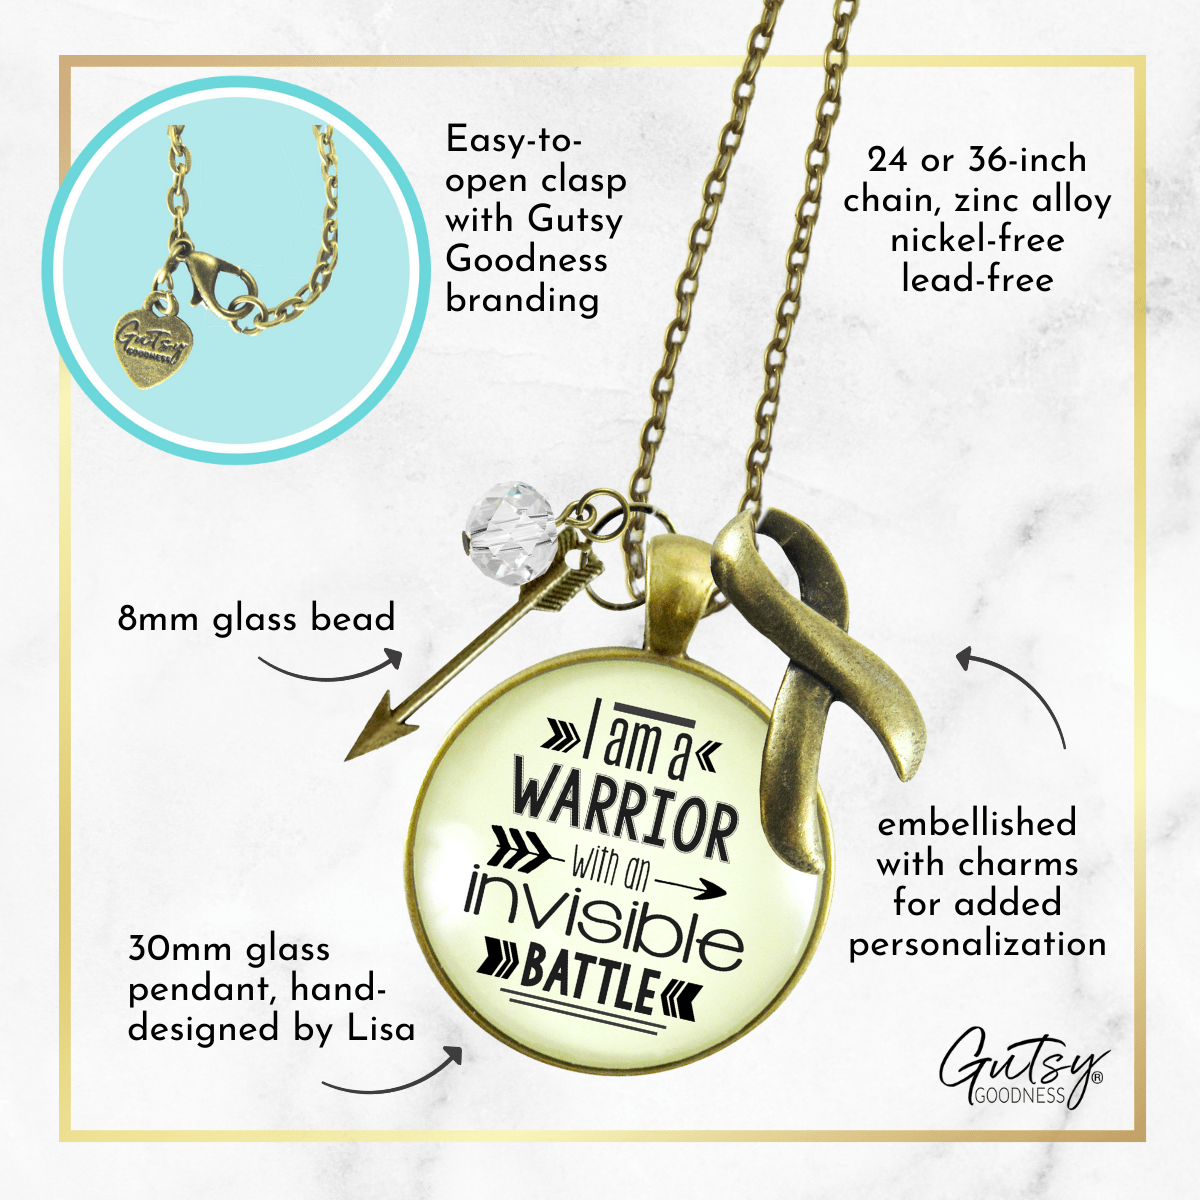 Gutsy Goodness I am a Warrior Invisible Battle Necklace Strong Women Quote Charm - Gutsy Goodness Handmade Jewelry;I Am A Warrior Invisible Battle Necklace Strong Women Quote Charm - Gutsy Goodness Handmade Jewelry Gifts